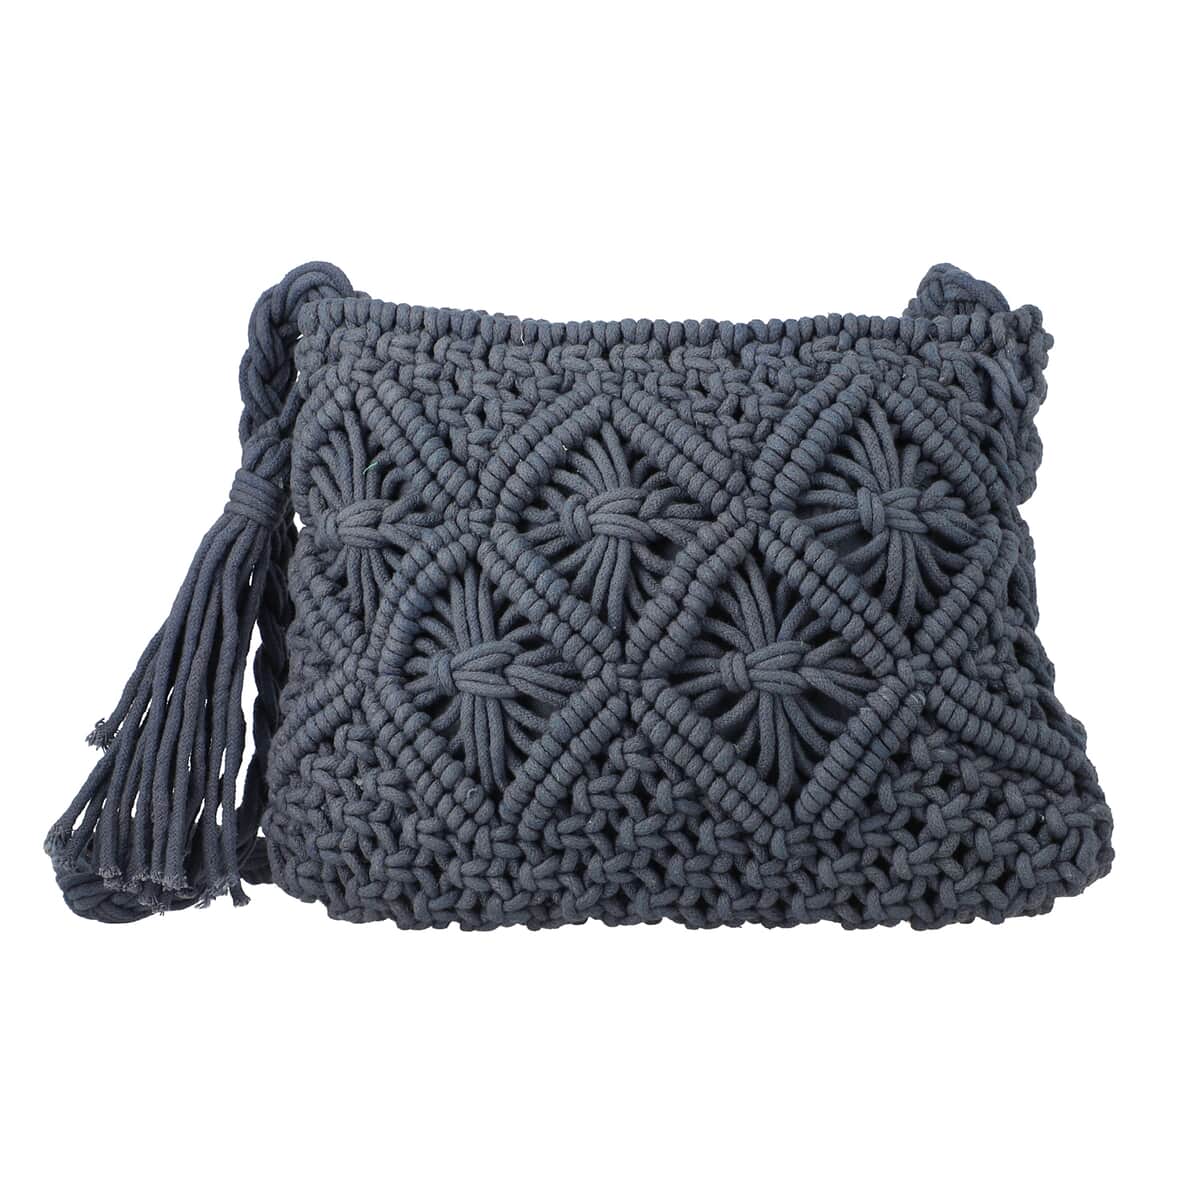 "100% Cotton Crossbody Macrame Bag SIZE: 9(L)x8(H) with 23 inch long handle COLOR: Gray" image number 0